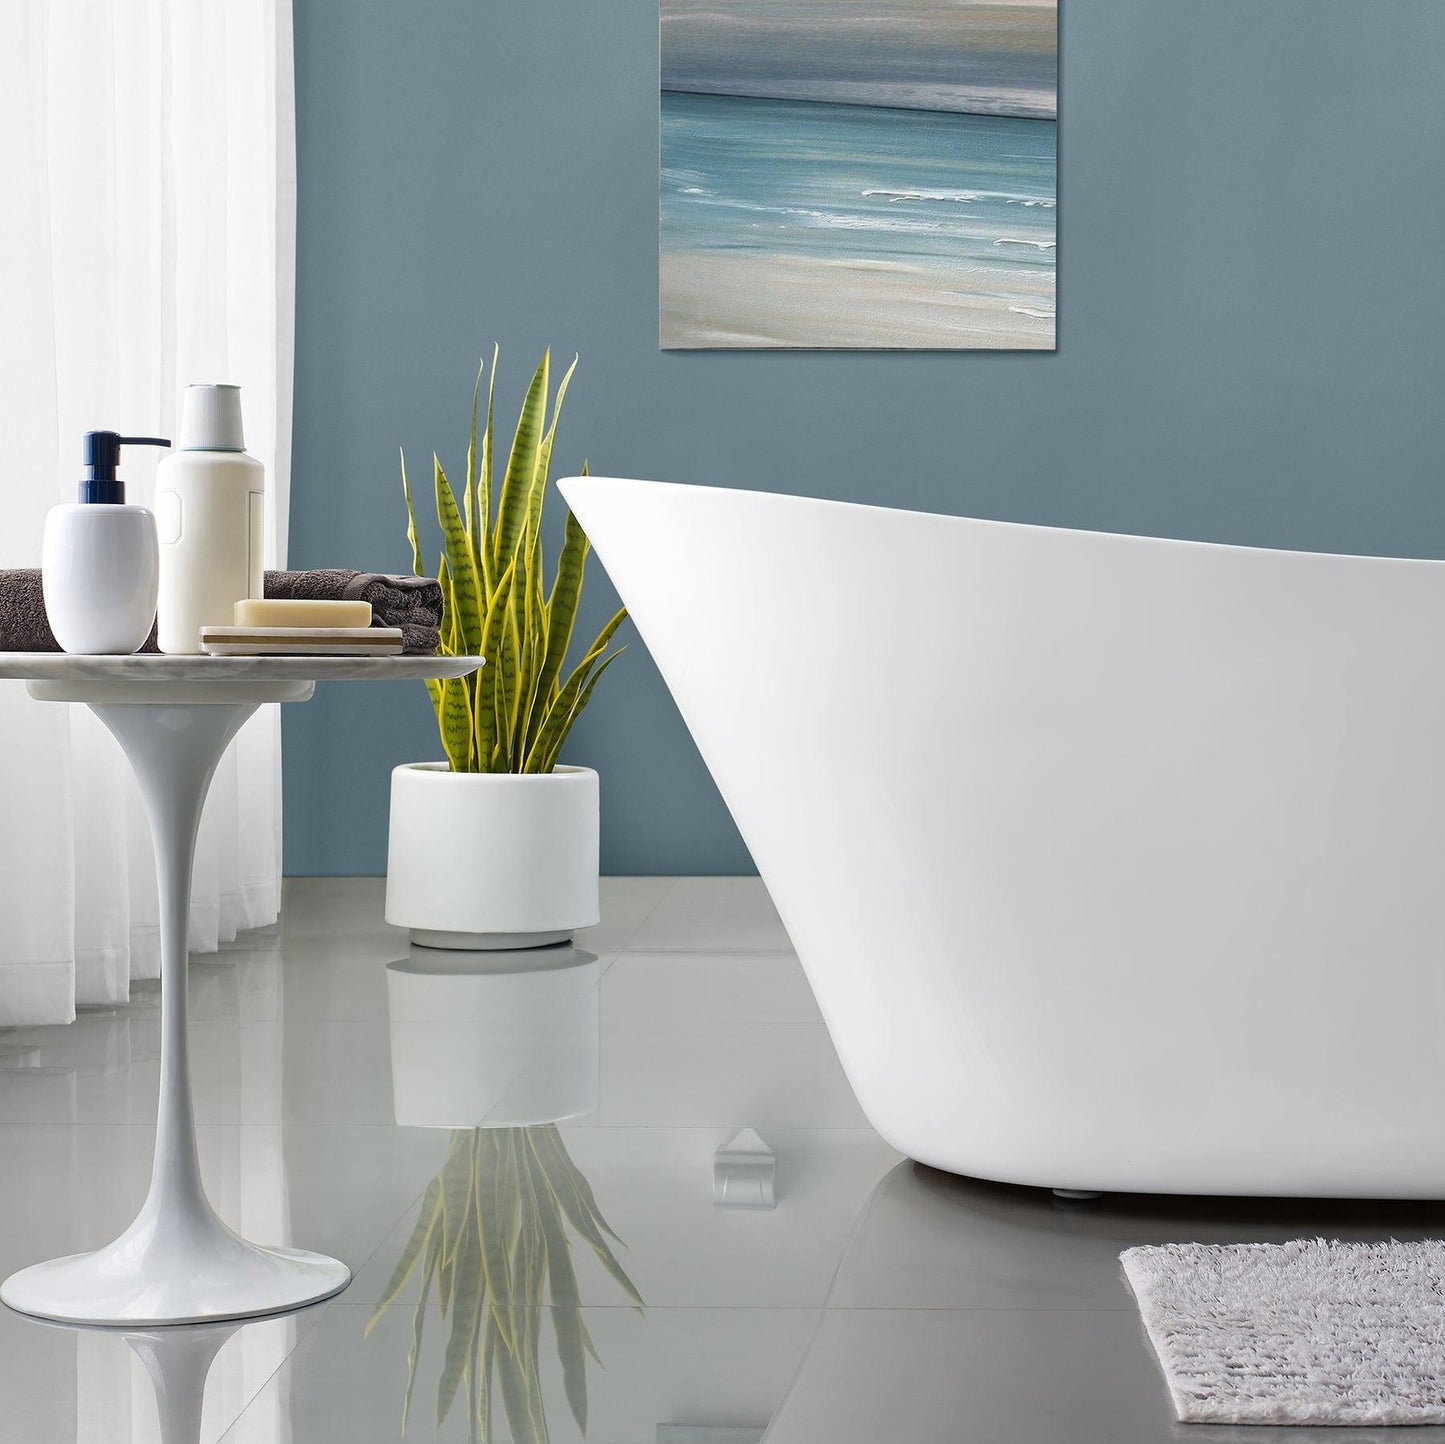 Swiss Madison Sublime 68" x 31" White Center Drain Freestanding Bathtub With Chrome Toe-Tap Drain and Overflow